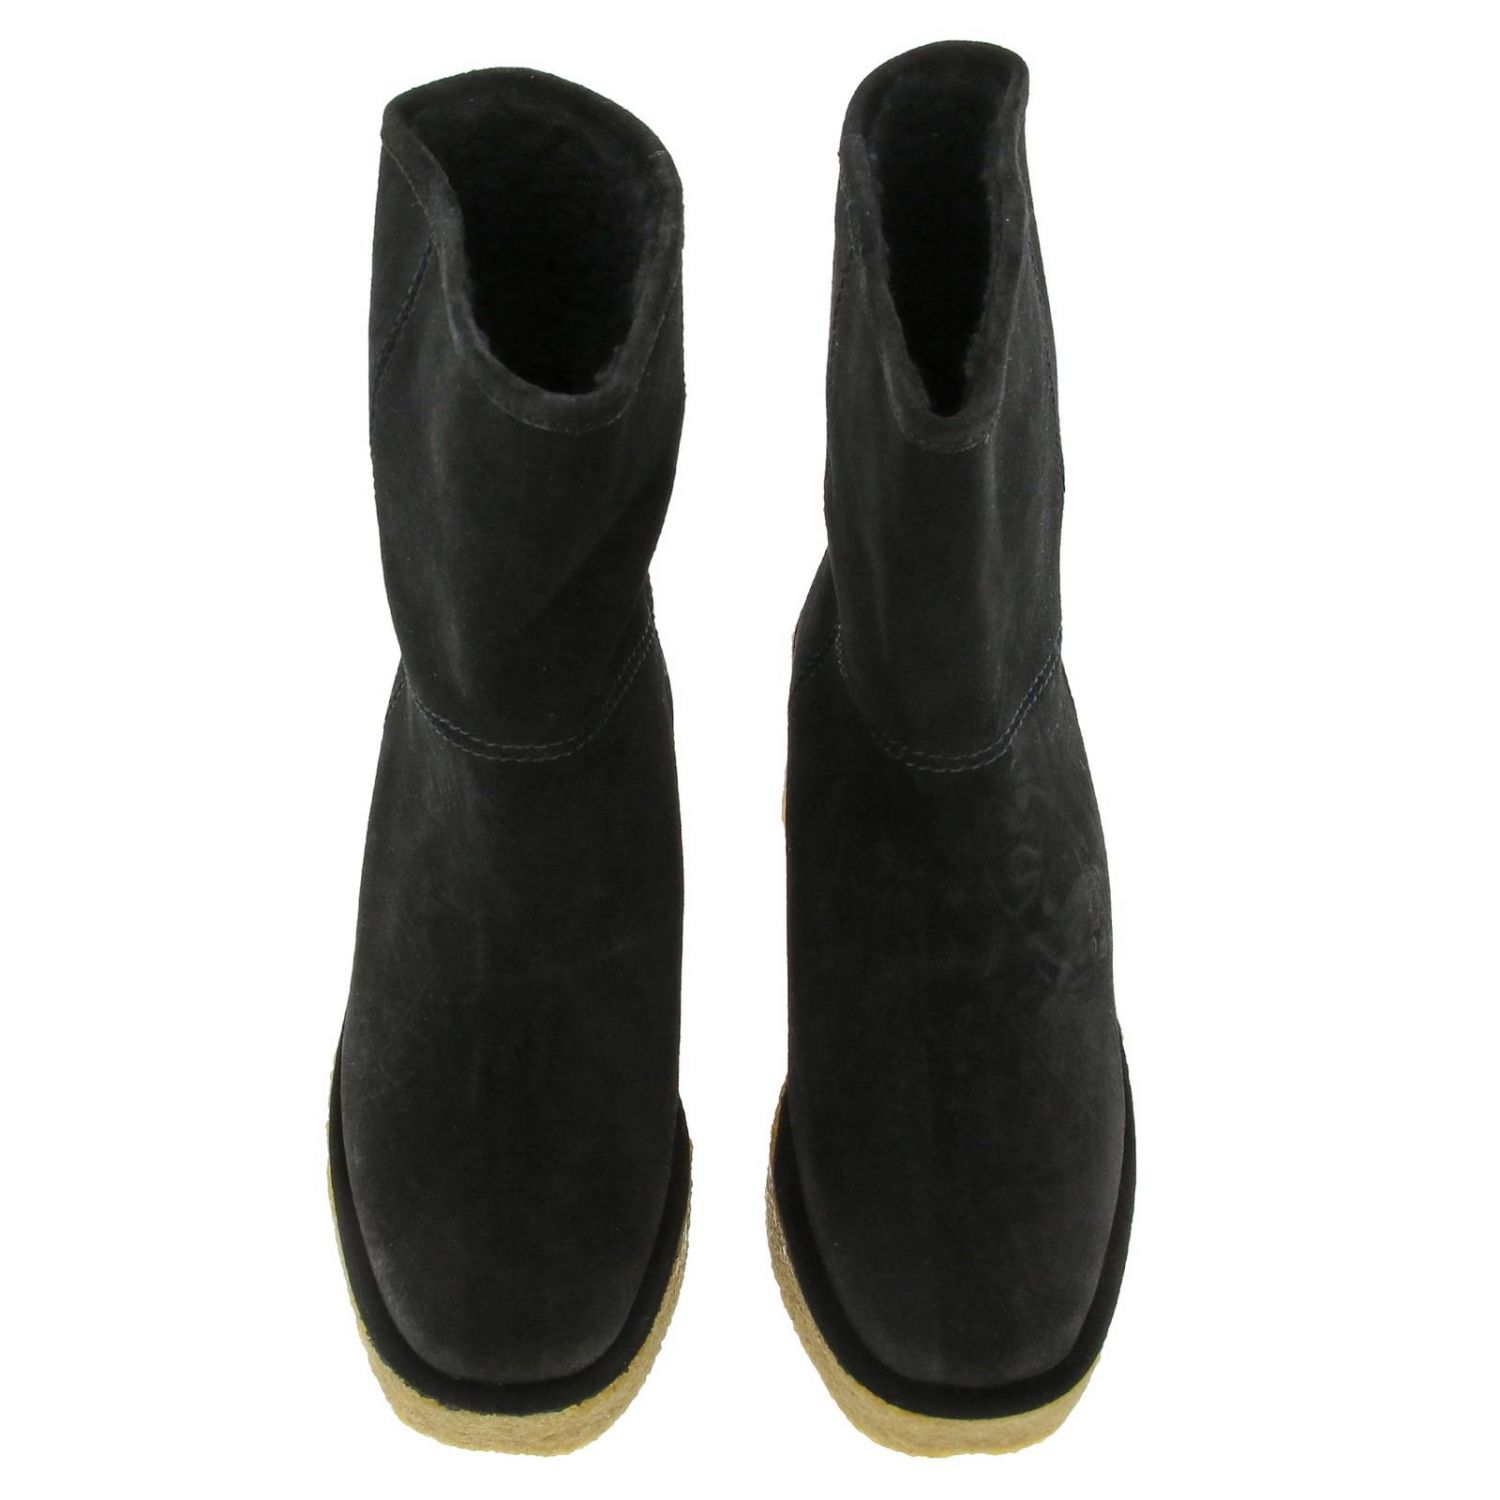 Jeffrey Campbell Outlet: wedge shoes for woman - Black | Jeffrey ...